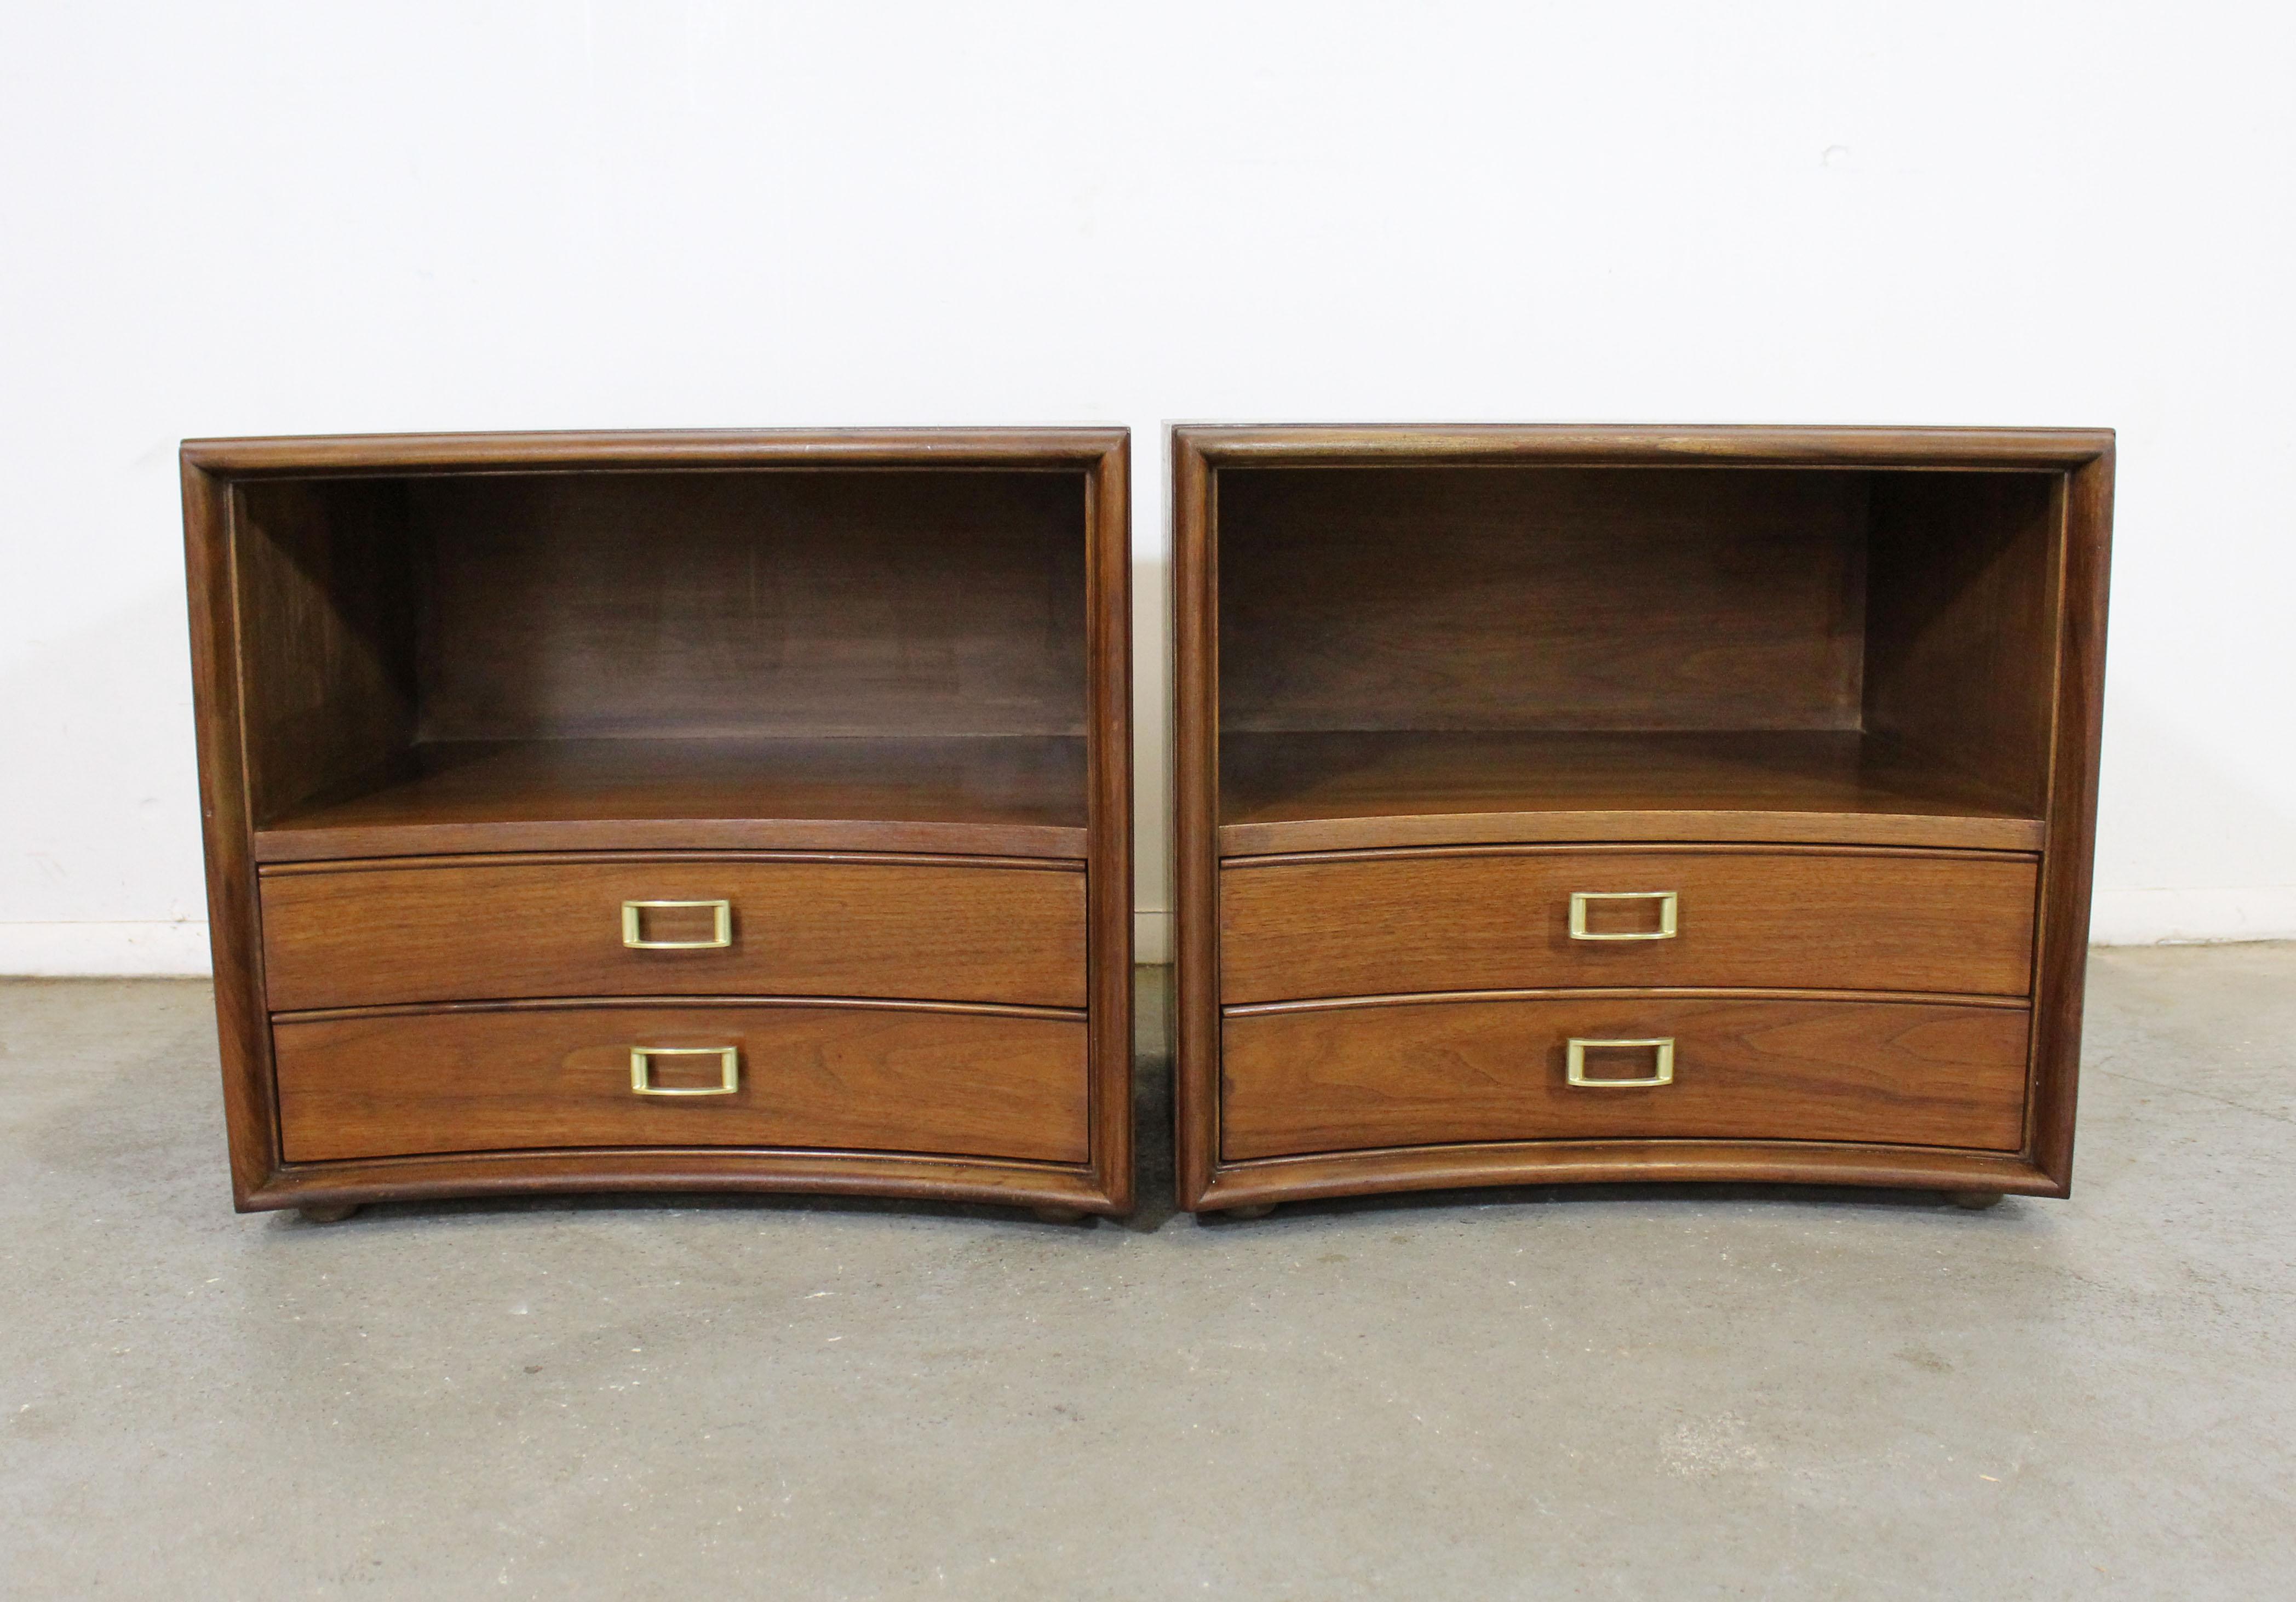 Offered is a pair of Mid-Century Modern nightstands designed by Paul Frankl for Johnson Furniture's 'Emissary' line. These stands feature curved fronts, two drawers each, and brass hardware. They have been refinished with a walnut stain. In very